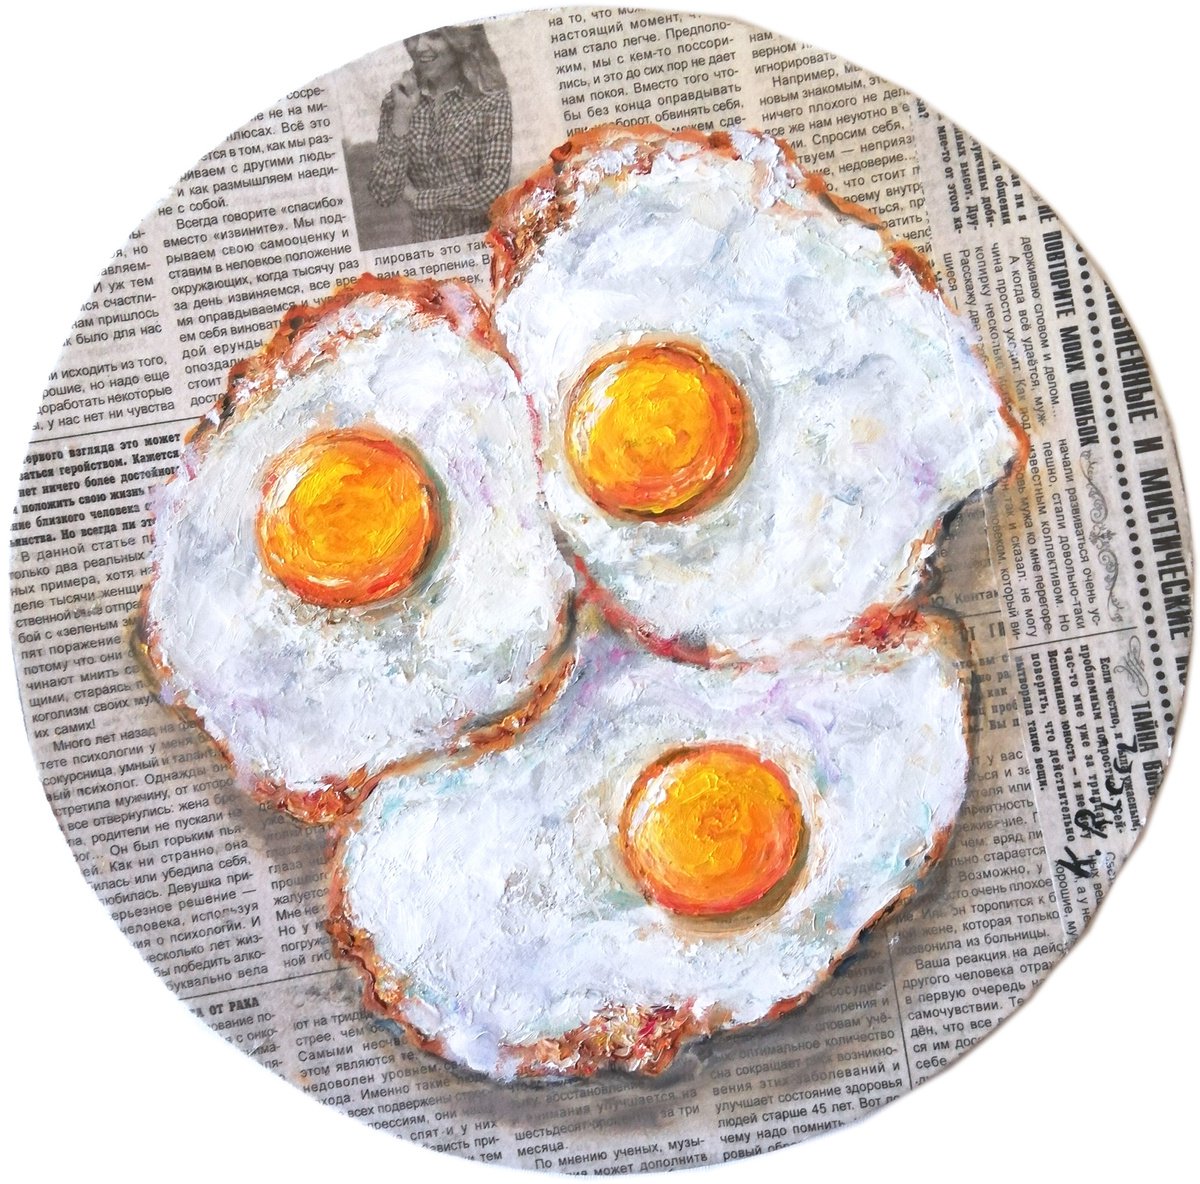 Fried Eggs on Newspaper Original Oil on Round Canvas Board 12 by 12 inches (30x30 cm) by Katia Ricci